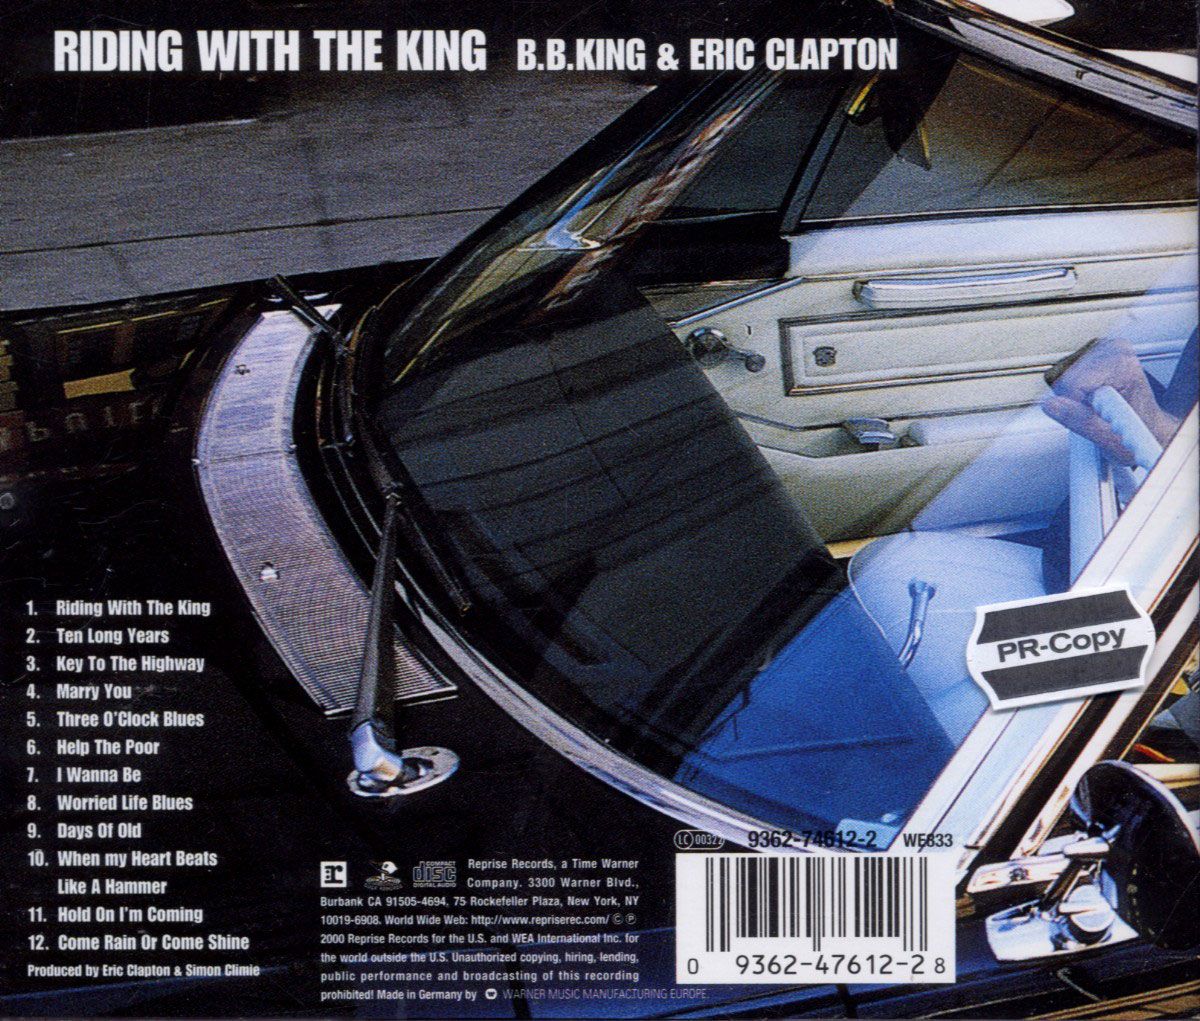 Riding with the King BB King and Eric Clapton album